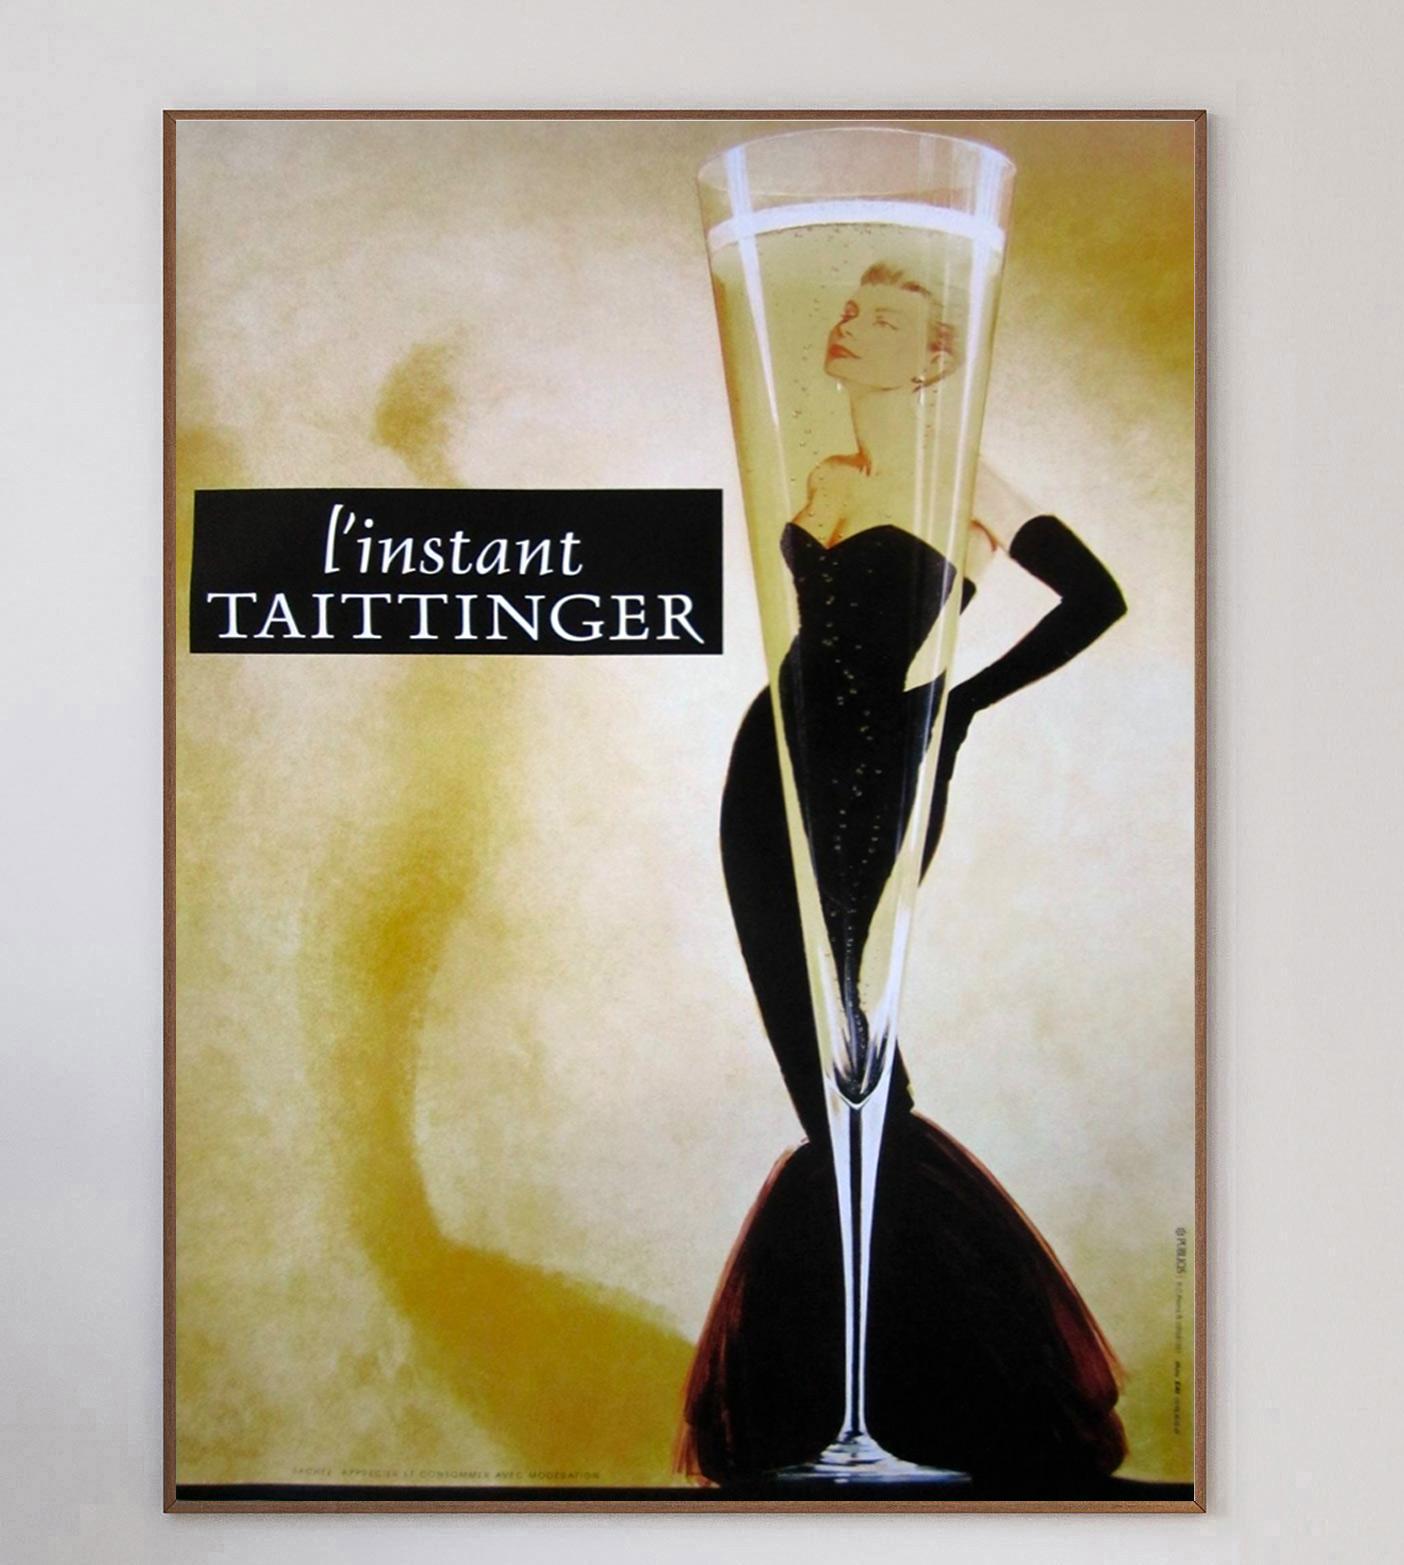 Founded in 1734, Taittinger have been producing champagne for nearly 300 years, and remains family owned and operated to this day. This gorgeous poster was created in 1988 and was part of the exceptionally successful 